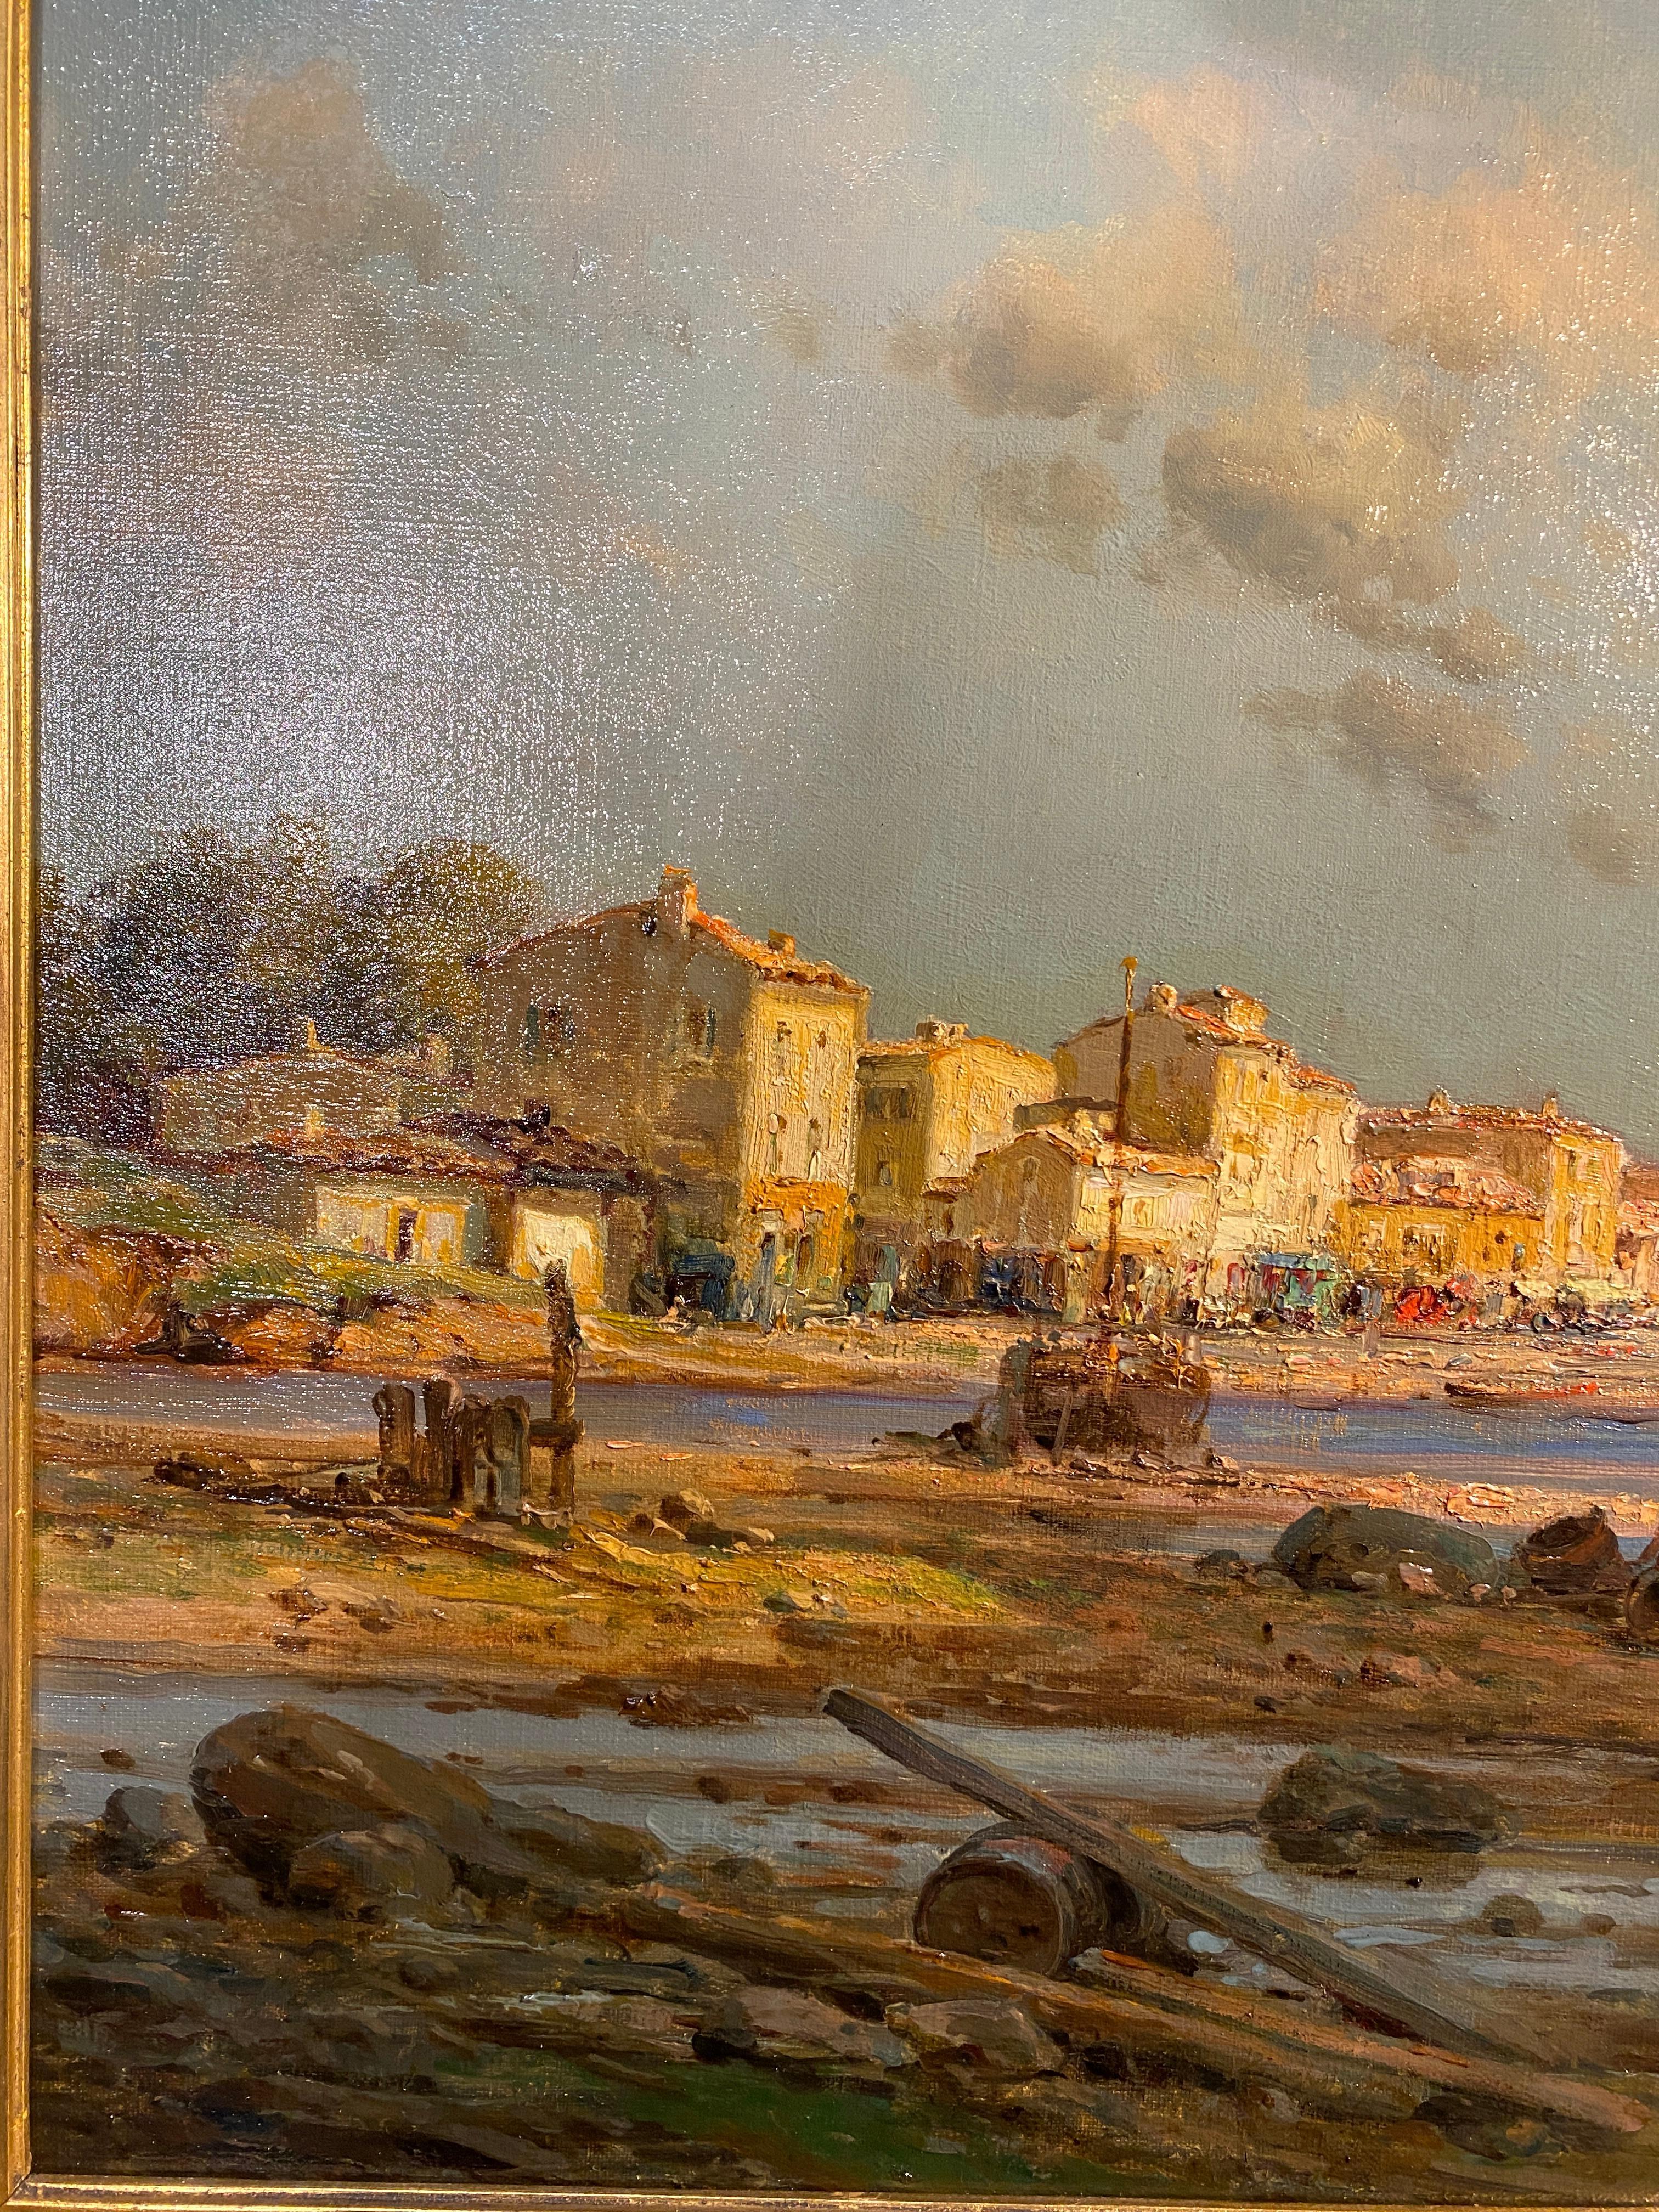 Painting, Oil On Canvas, Seaside French Landscape By Pierre Jacques Pelletier 1